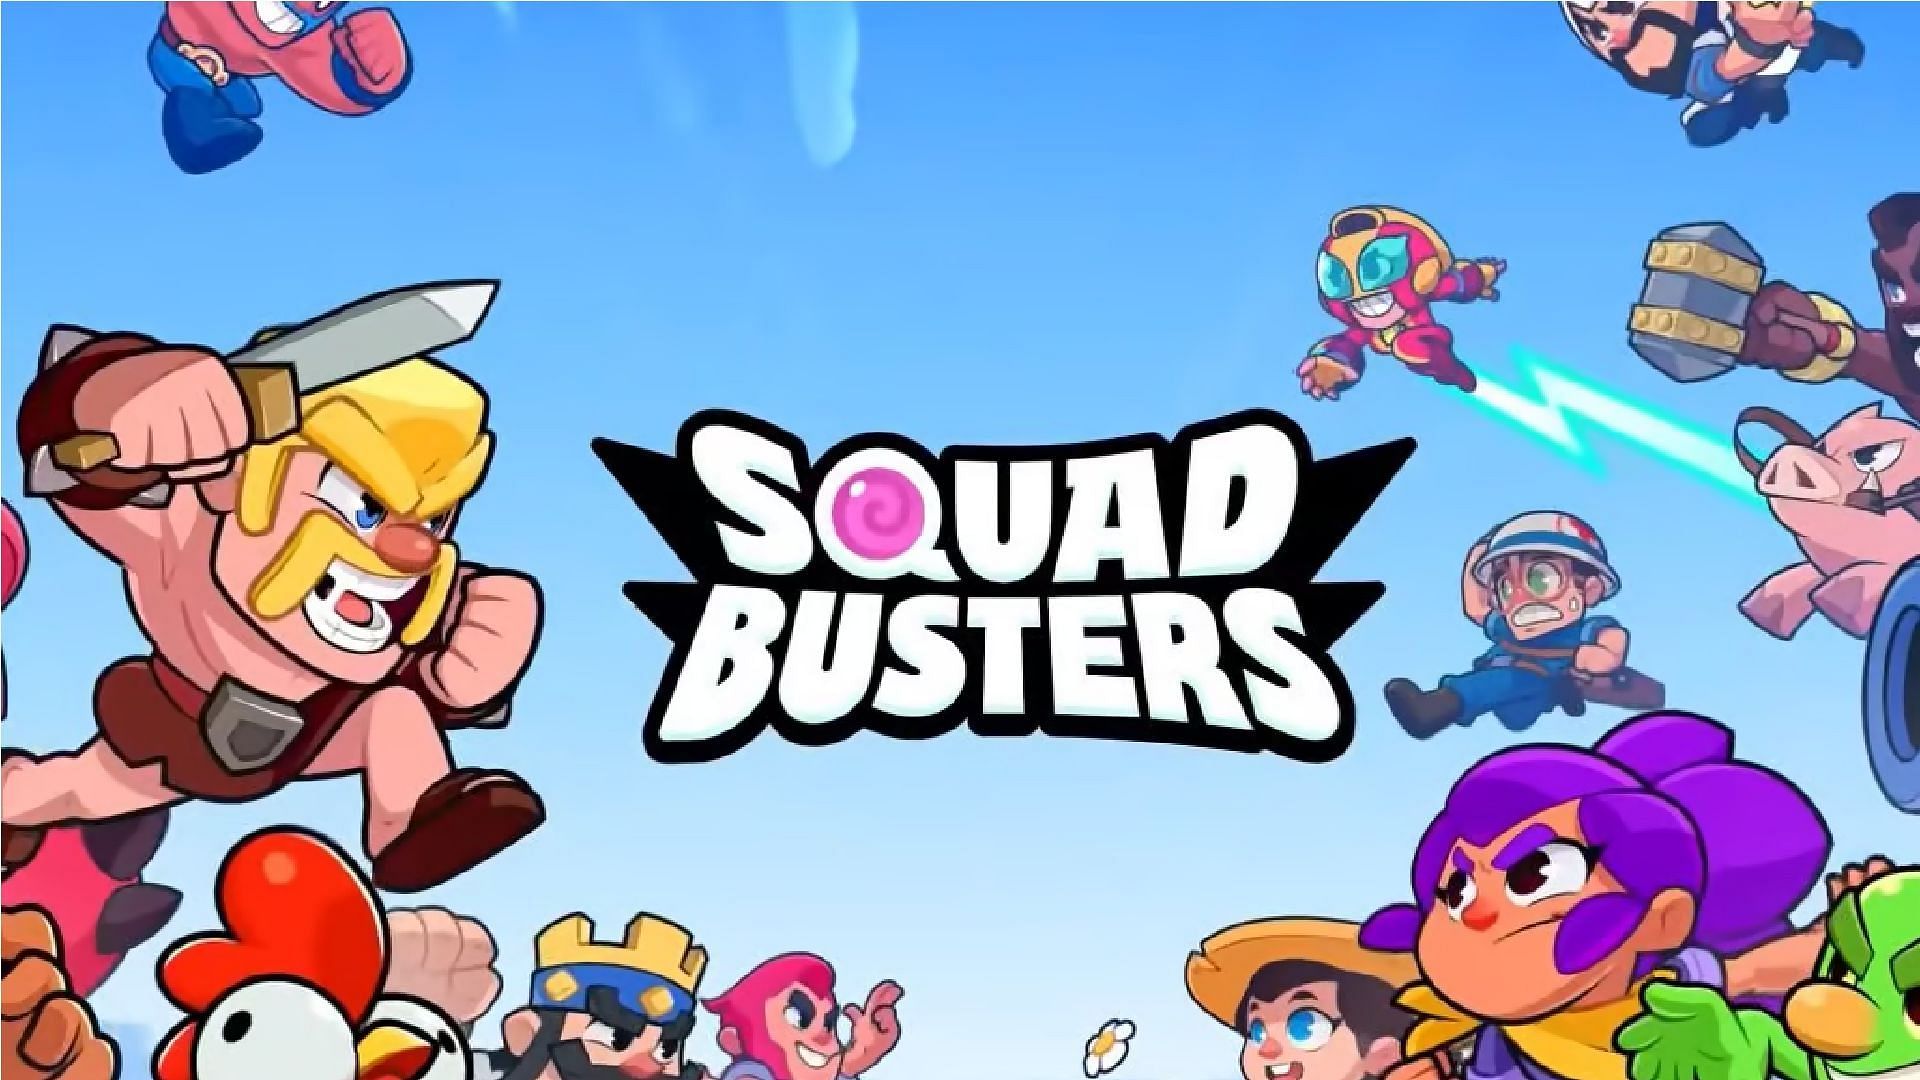 Get 5000 free gold in Squad Busters